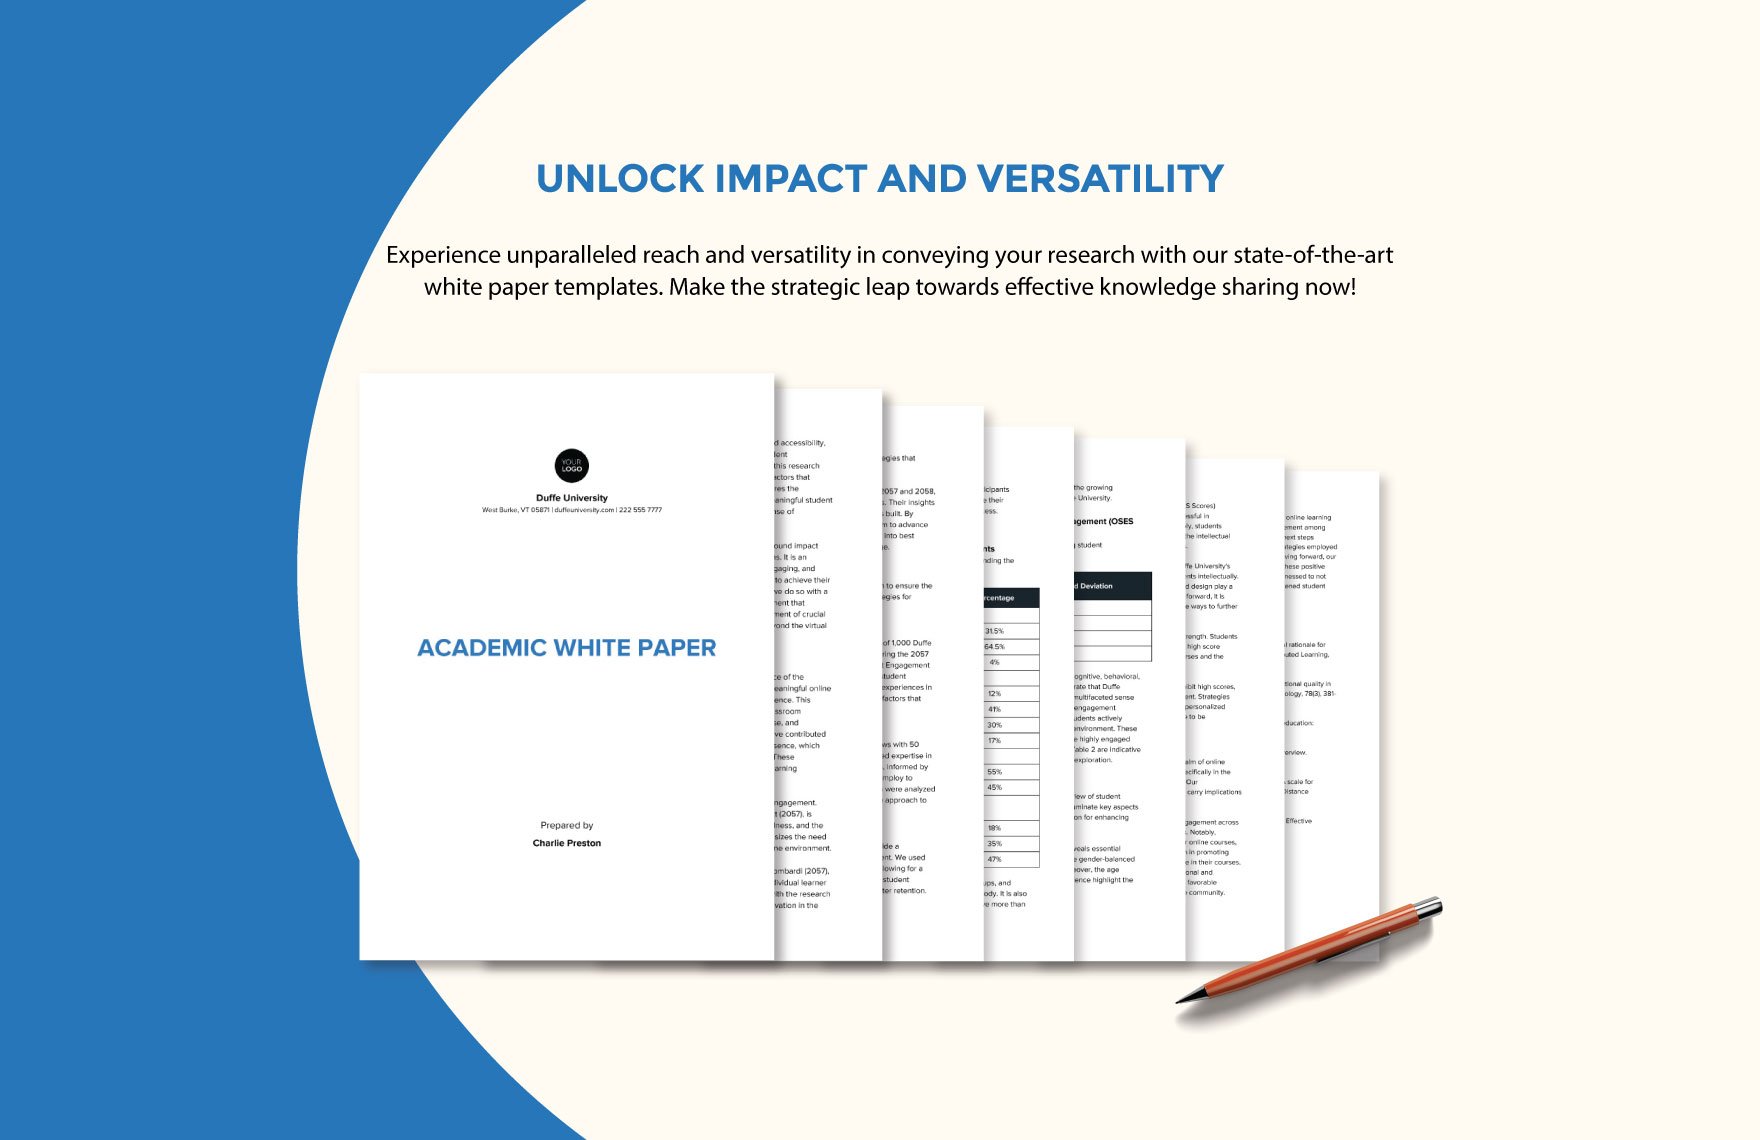 Academic White Paper Template